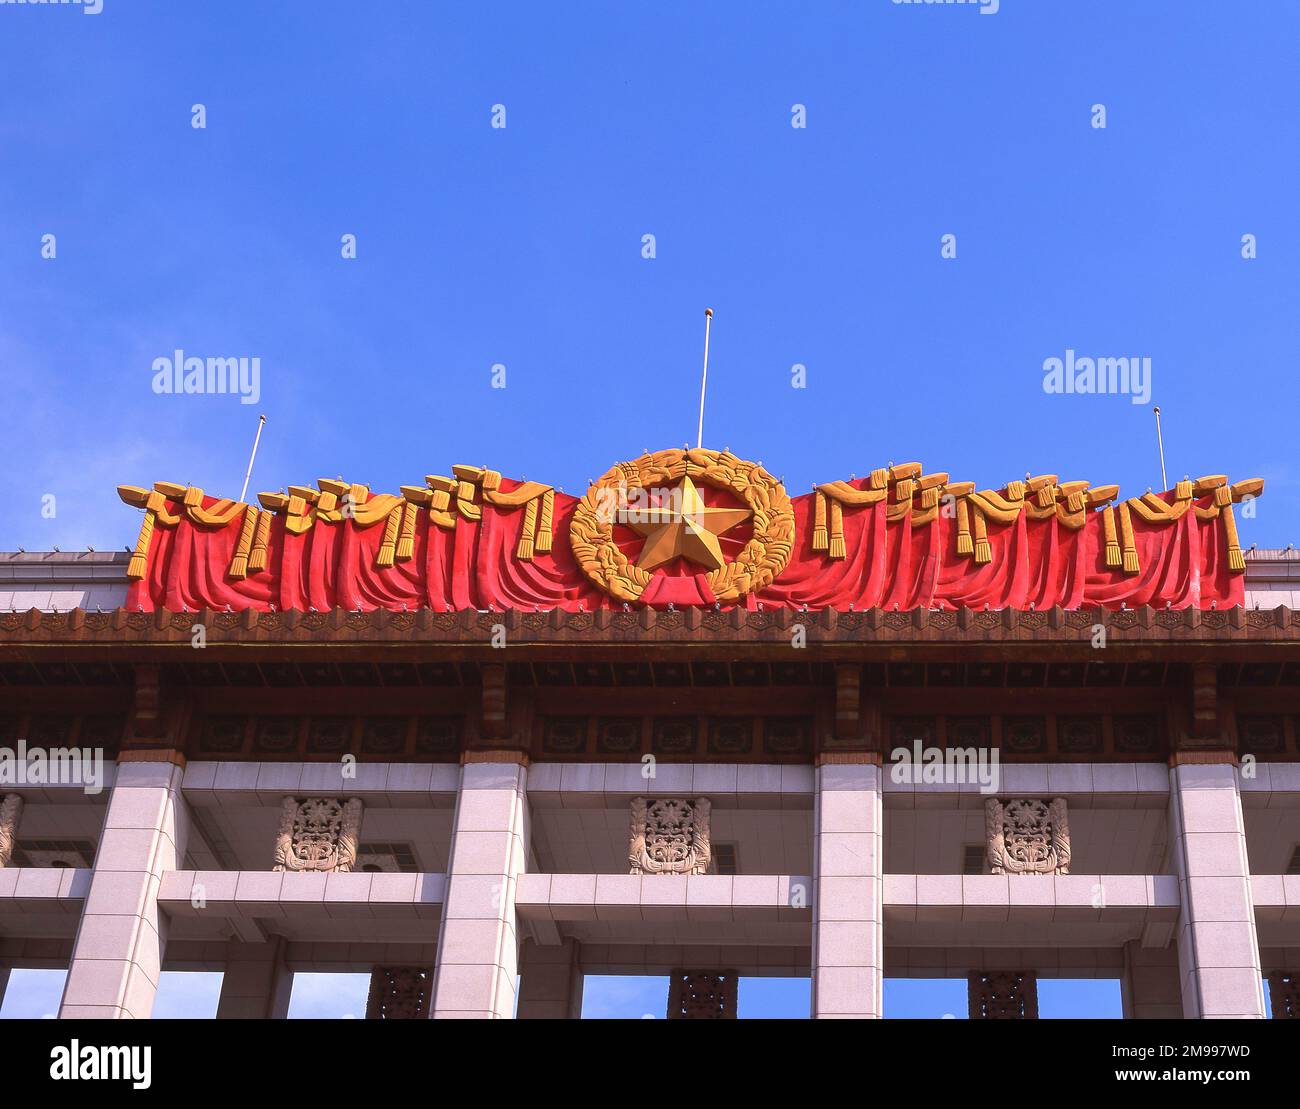 Communist Party of China (CPC) logo atop National Museum of China in Tiananmen Square, Dongcheng, Beijing, The People's Republic of China Stock Photo